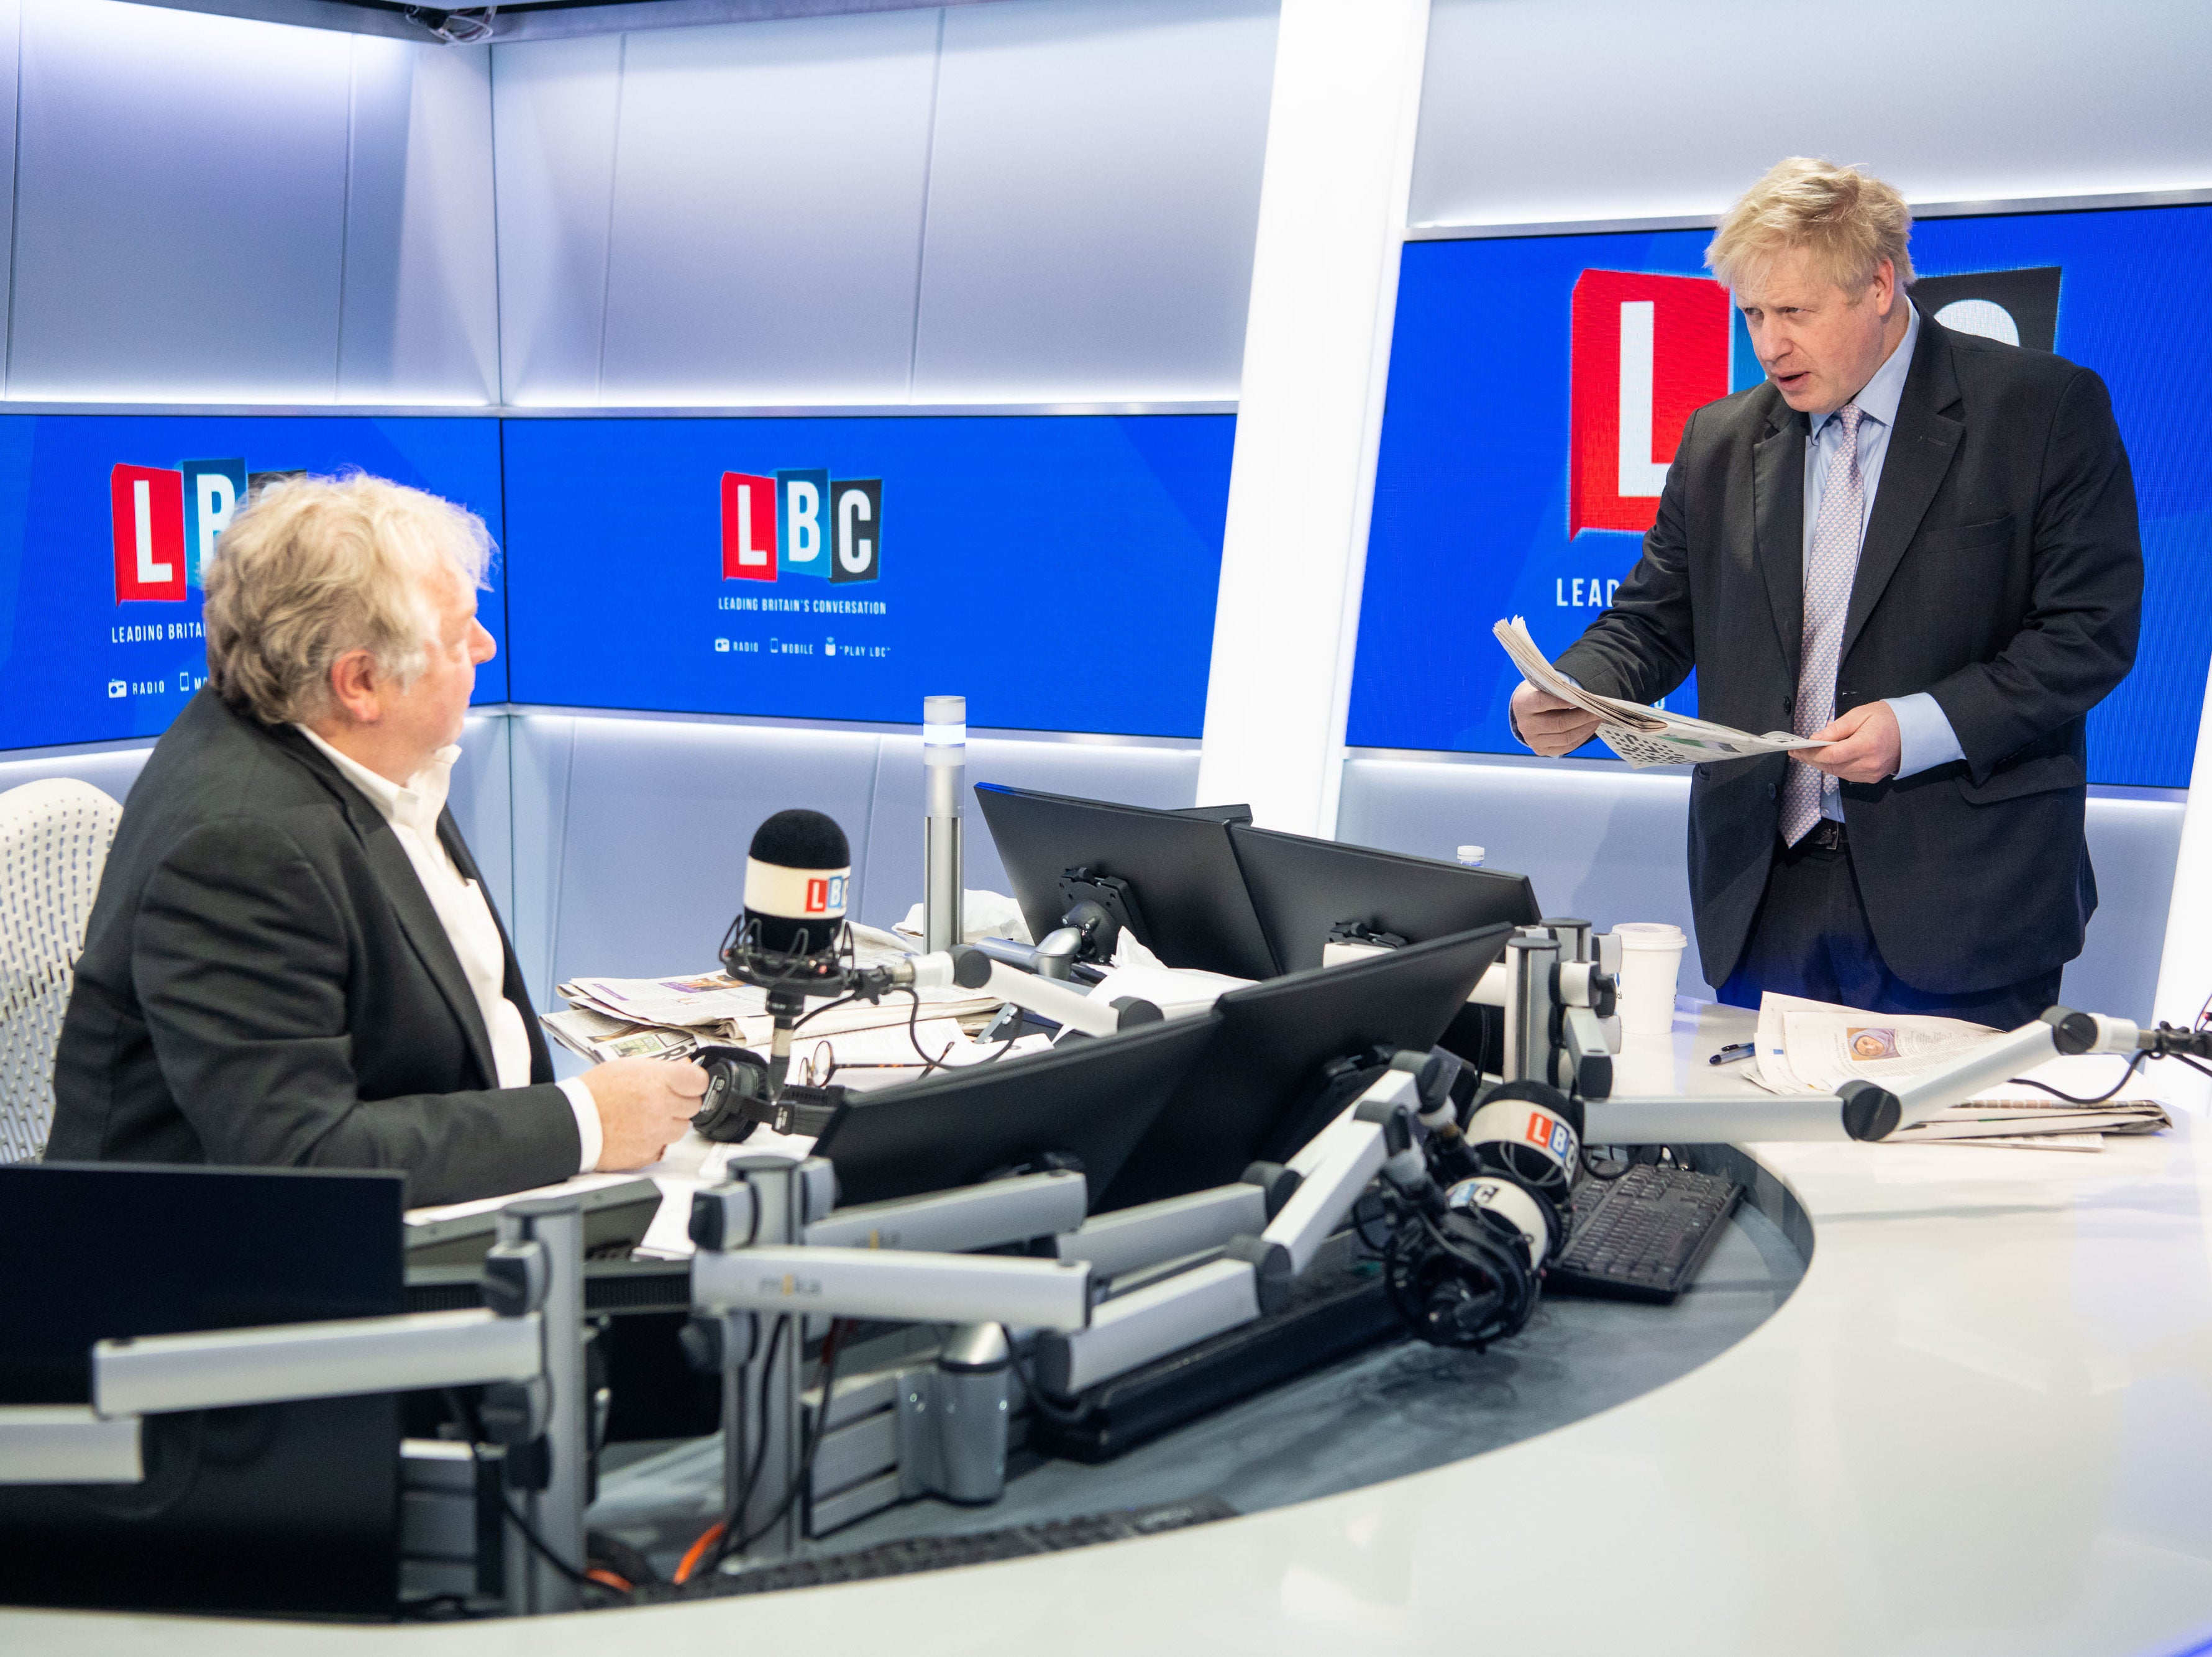 RAJAR: LBC grows to record 2.2m audience while BBC Radio 4 sheds 770,000 listeners